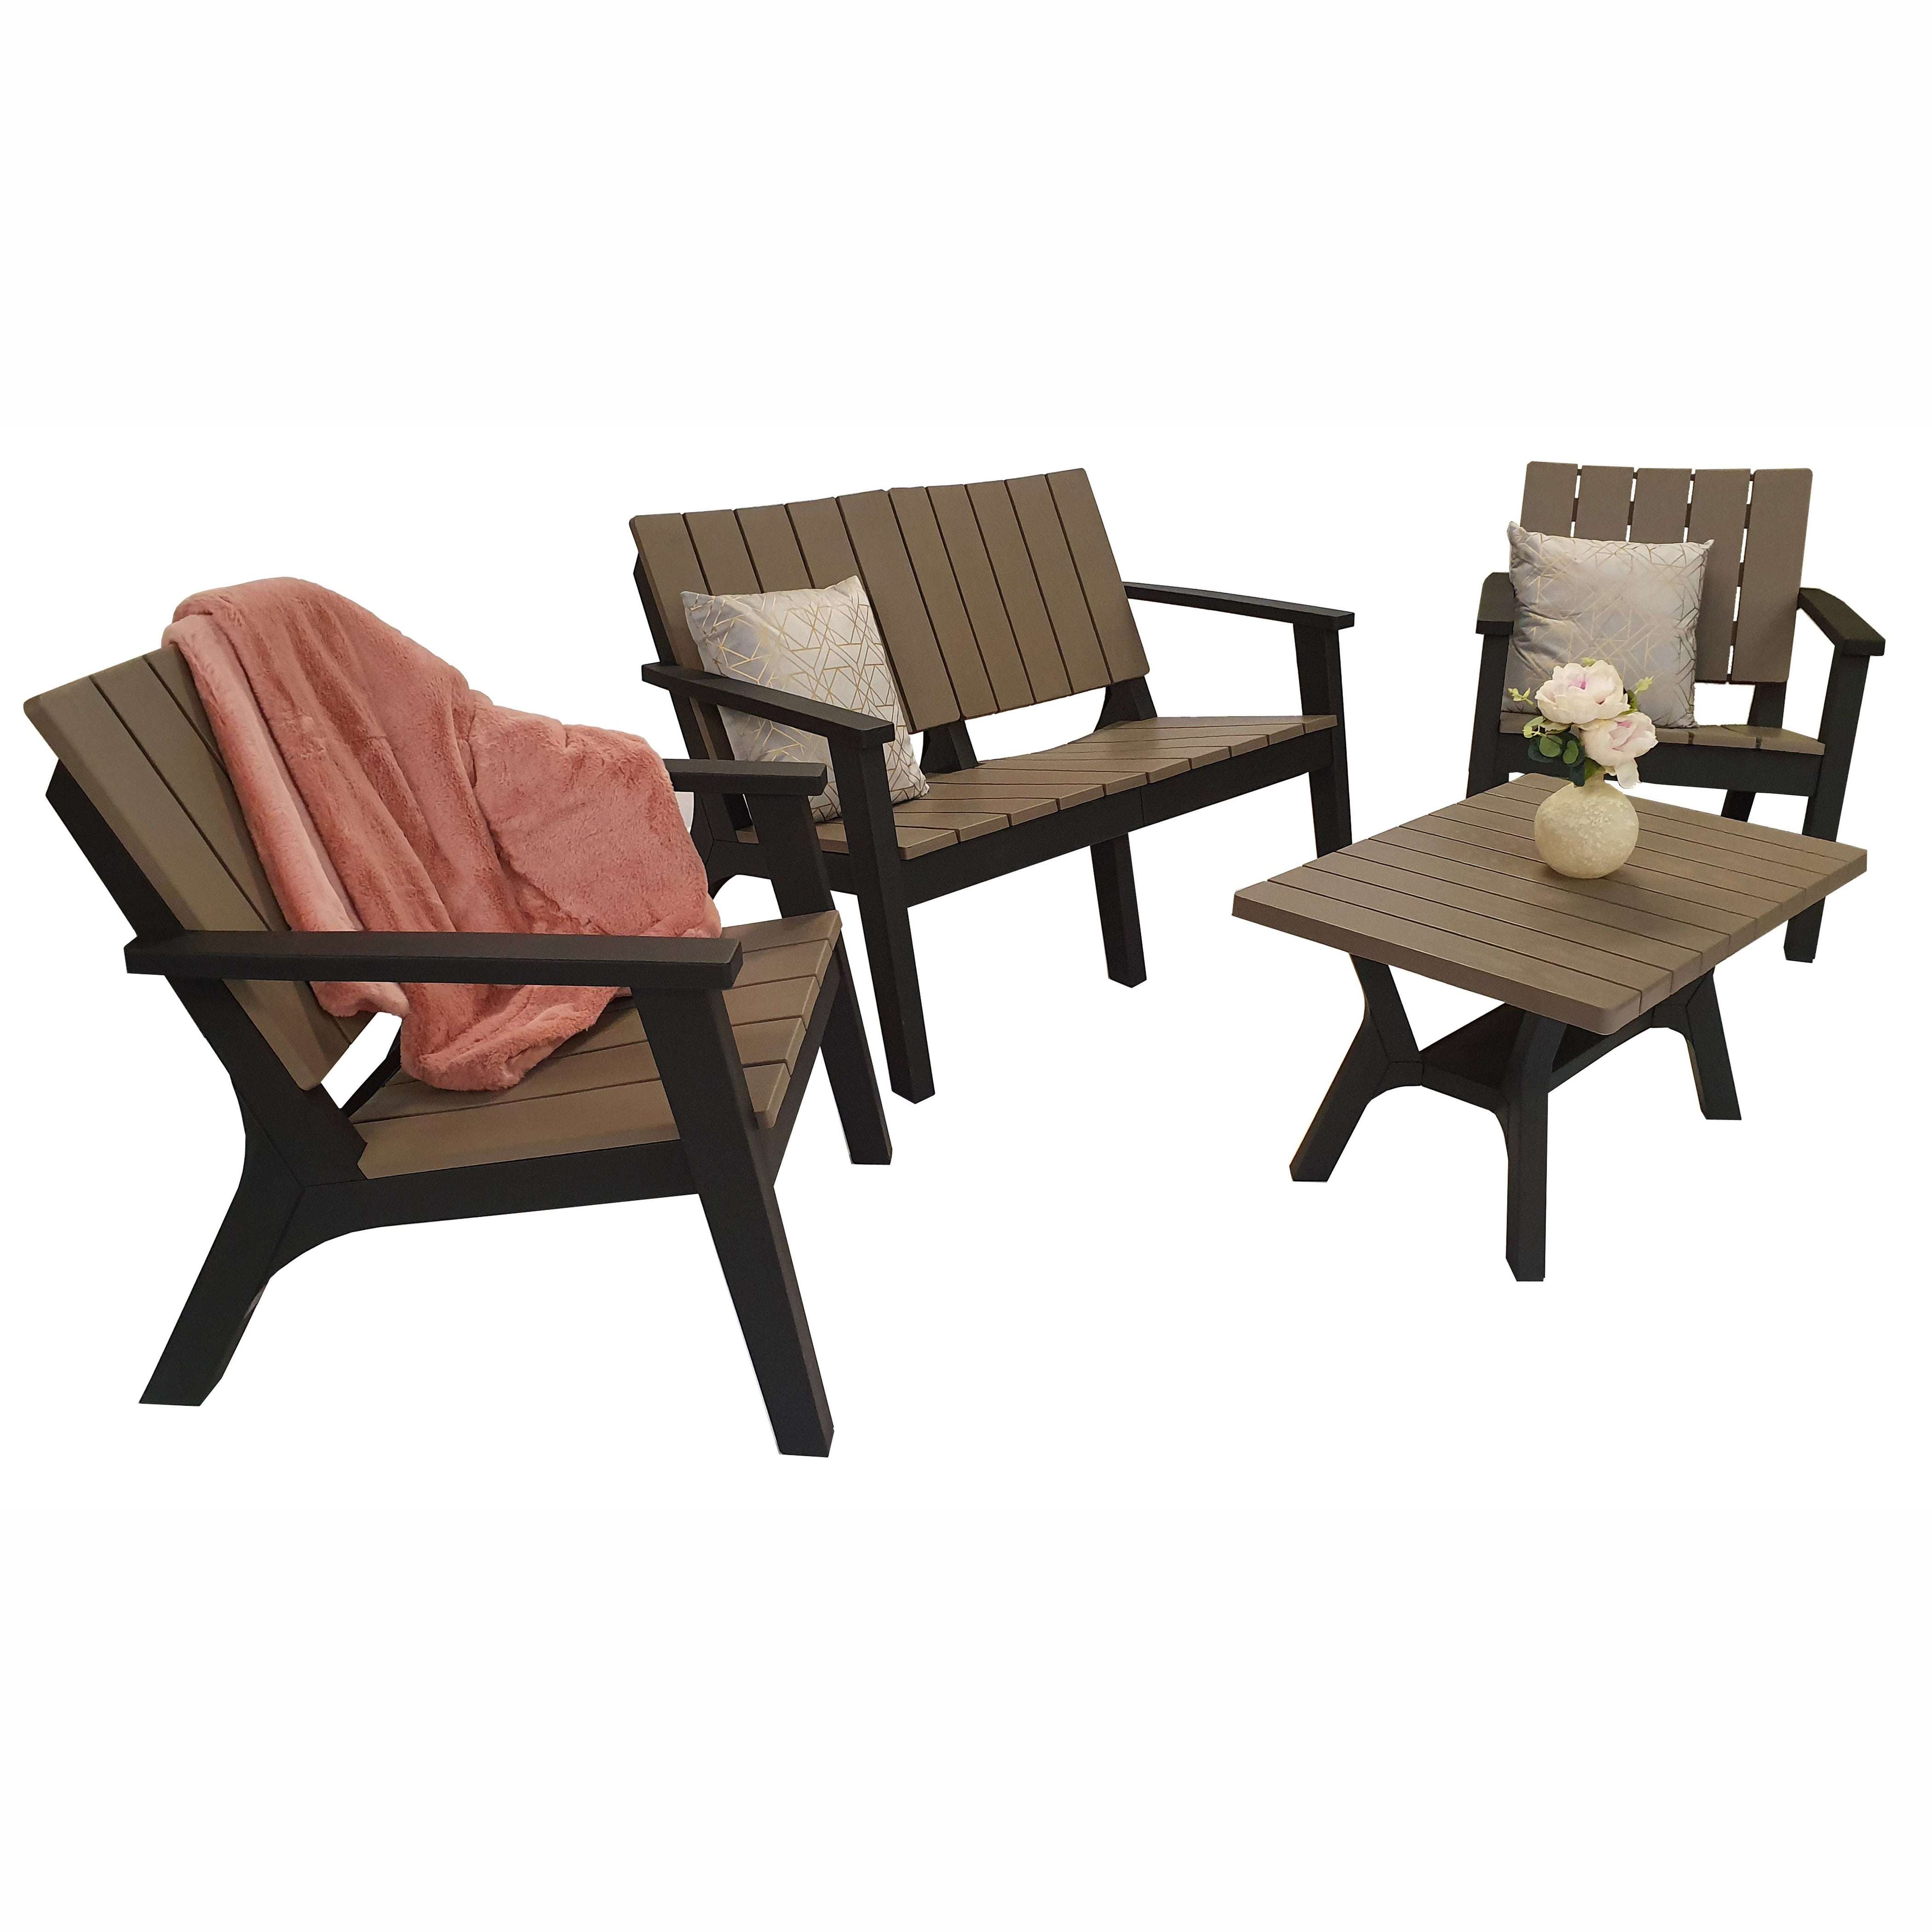 Exceptional Garden:Signature Weave Polly 4-Seater Sofa Set with Coffee Table